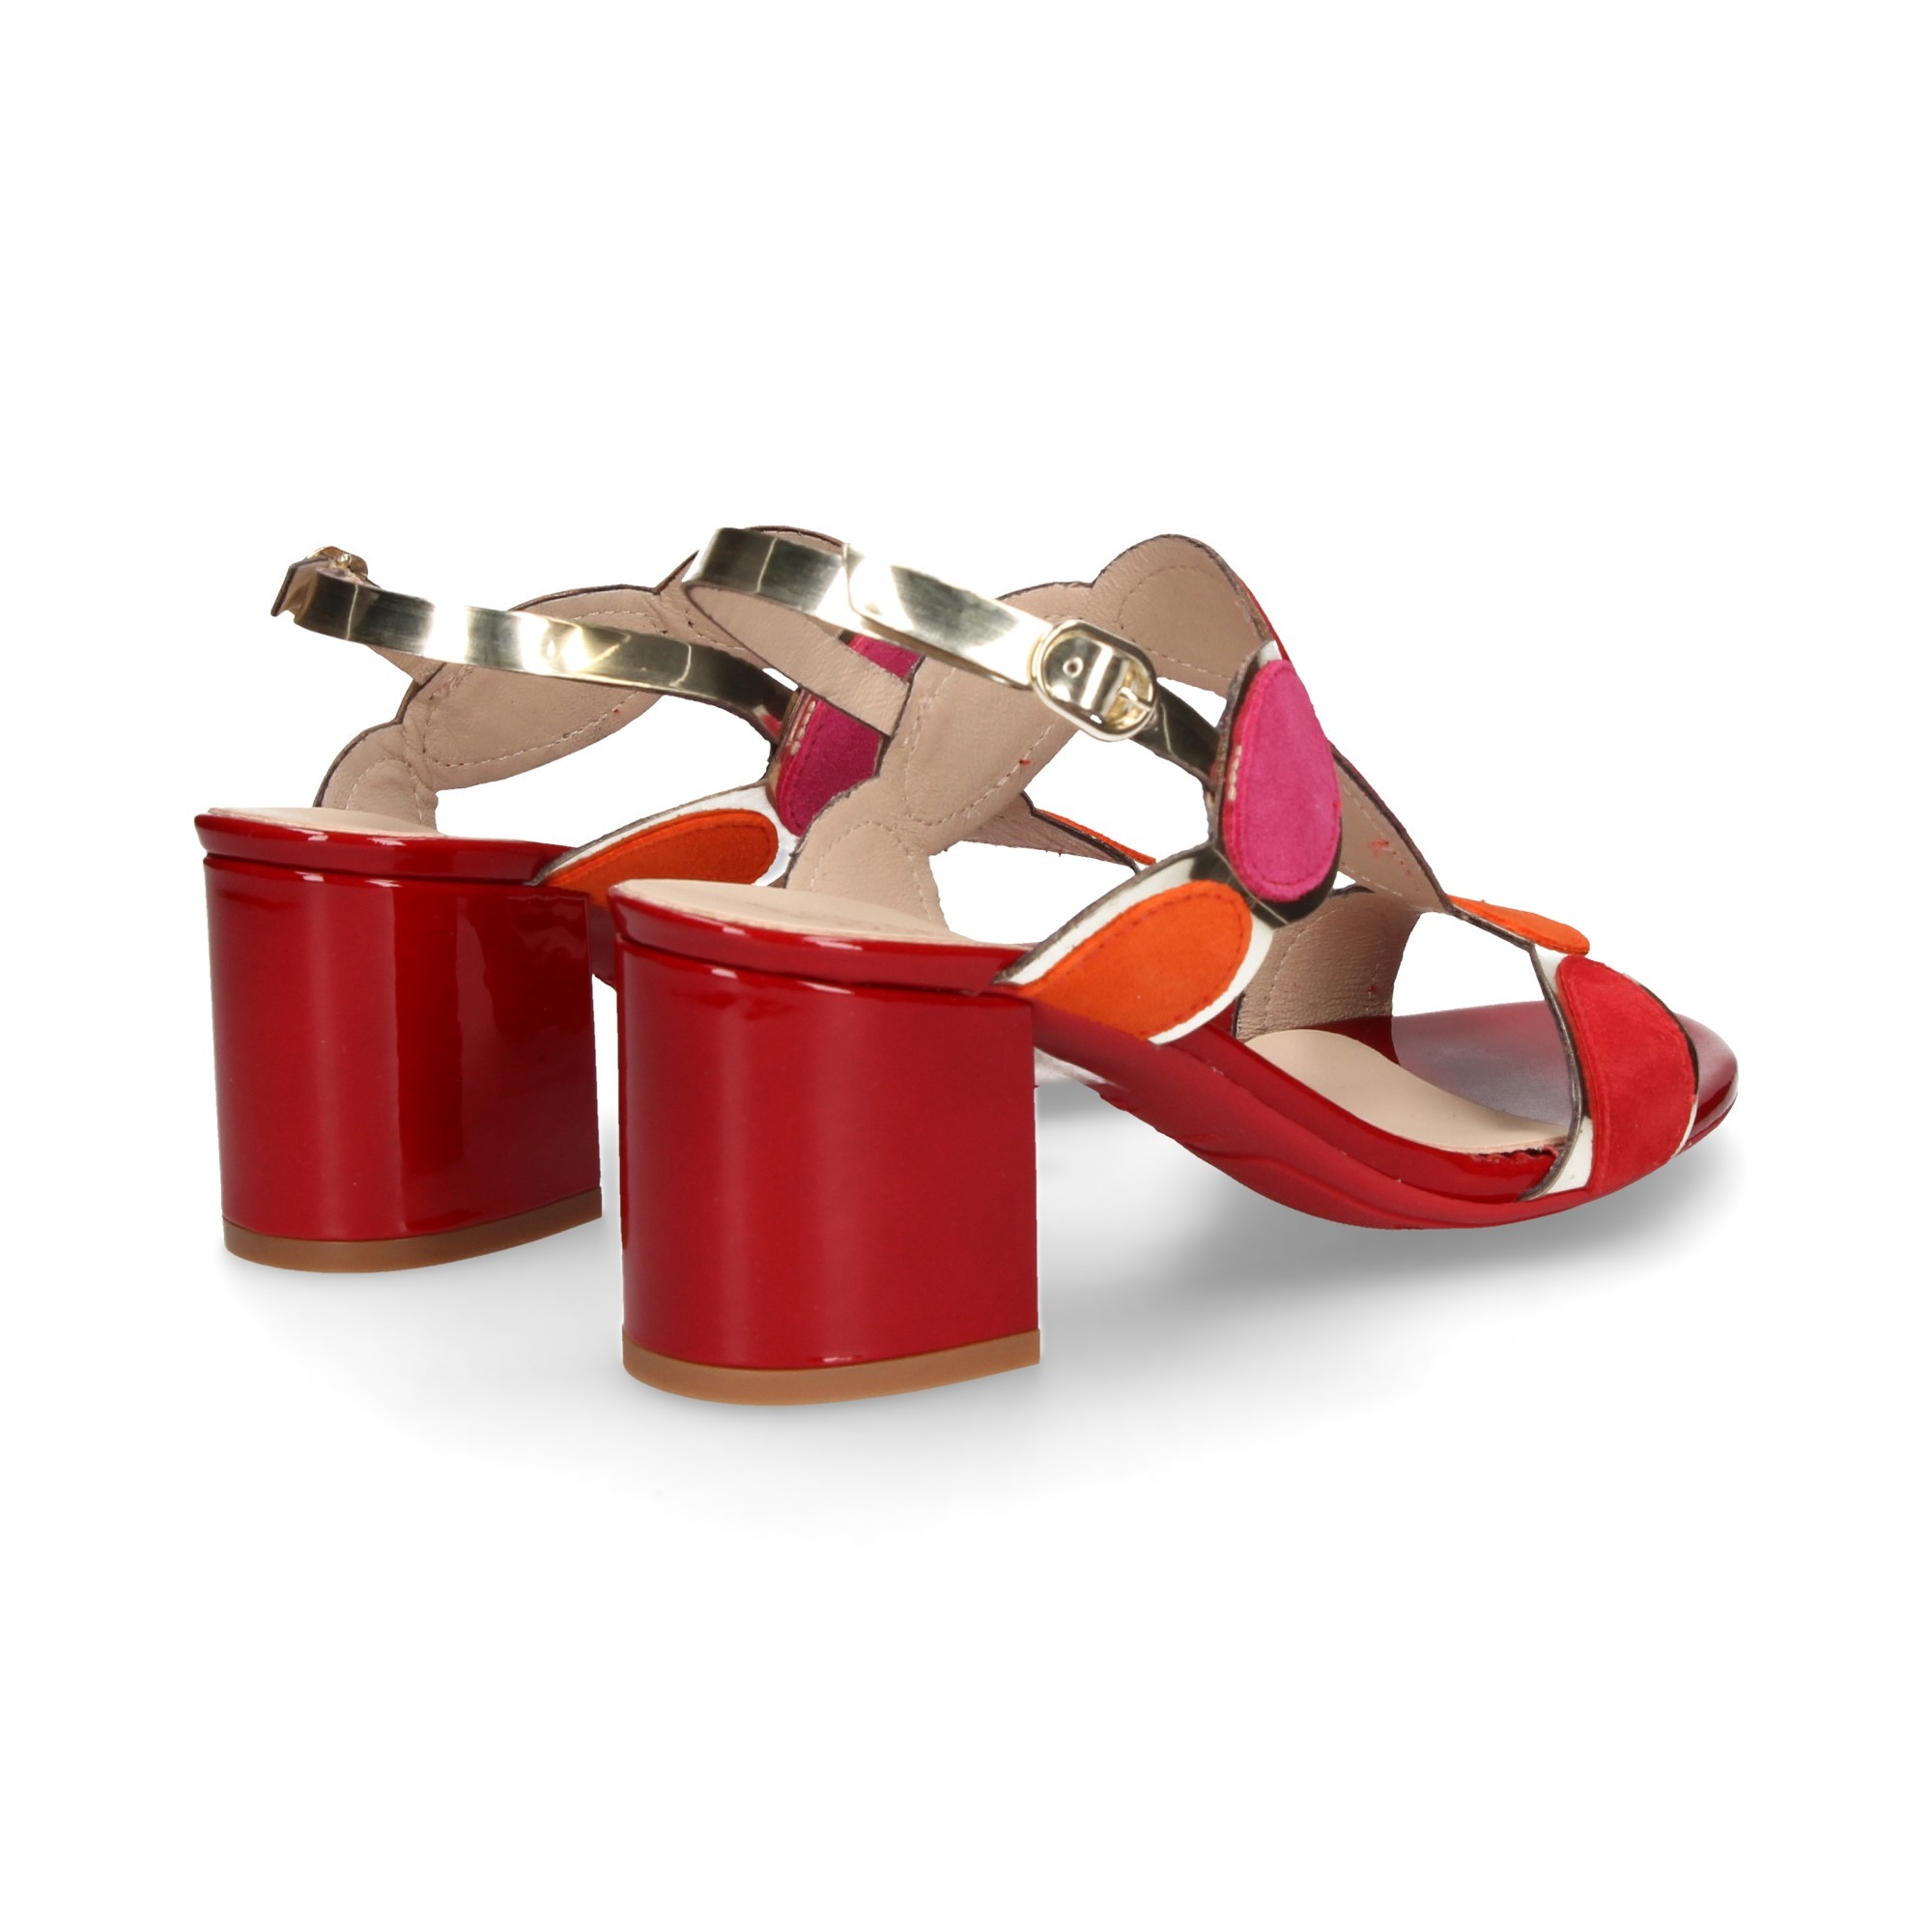 oval-heel-sandal-in-front-of-red-mirror